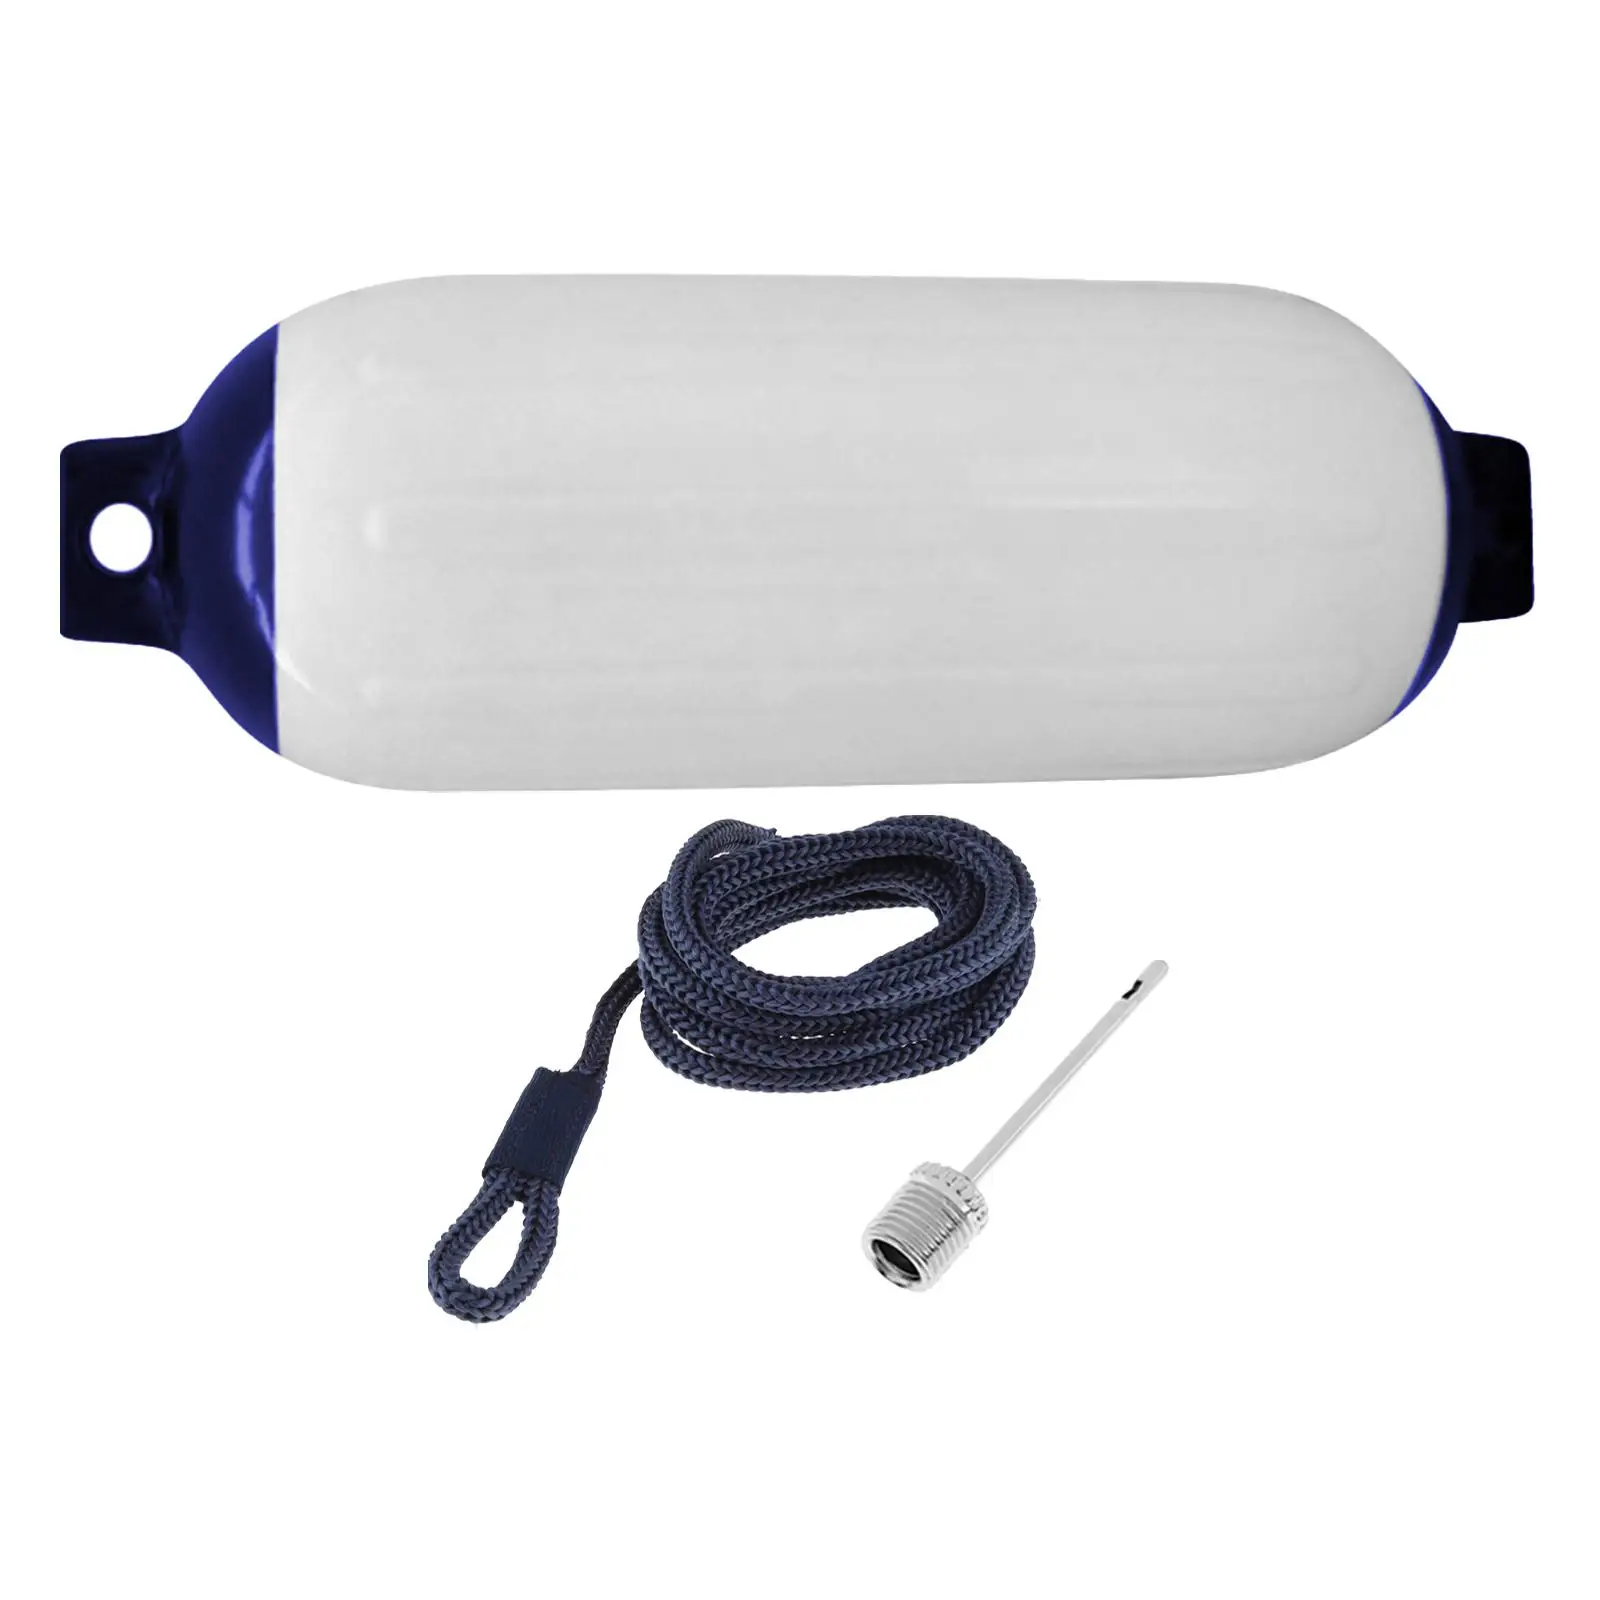 Boat Fender Boat Accessories Protection for Docking Yacht Fishing Boats